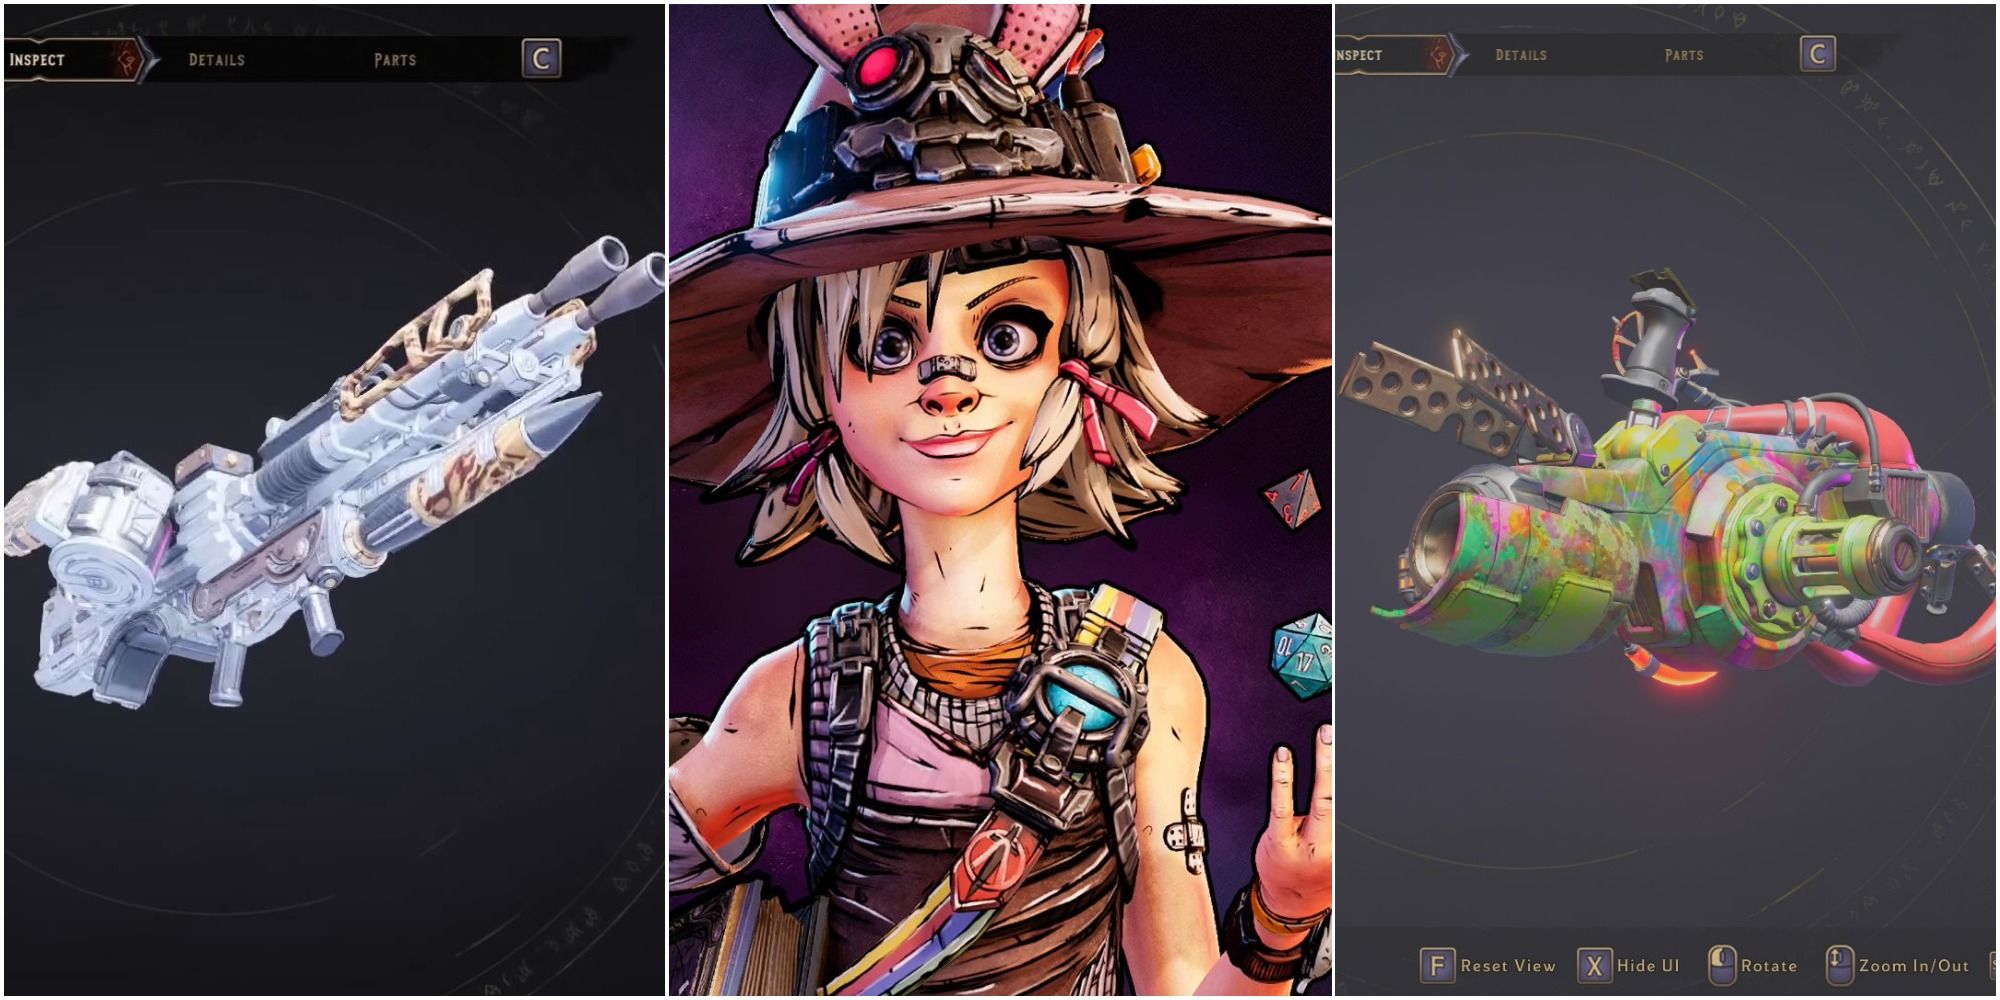 split image from left to right: the Delugeon heavy weapon, Tiny Tina throwing dice into the air, and the Bedlam heavy weapon